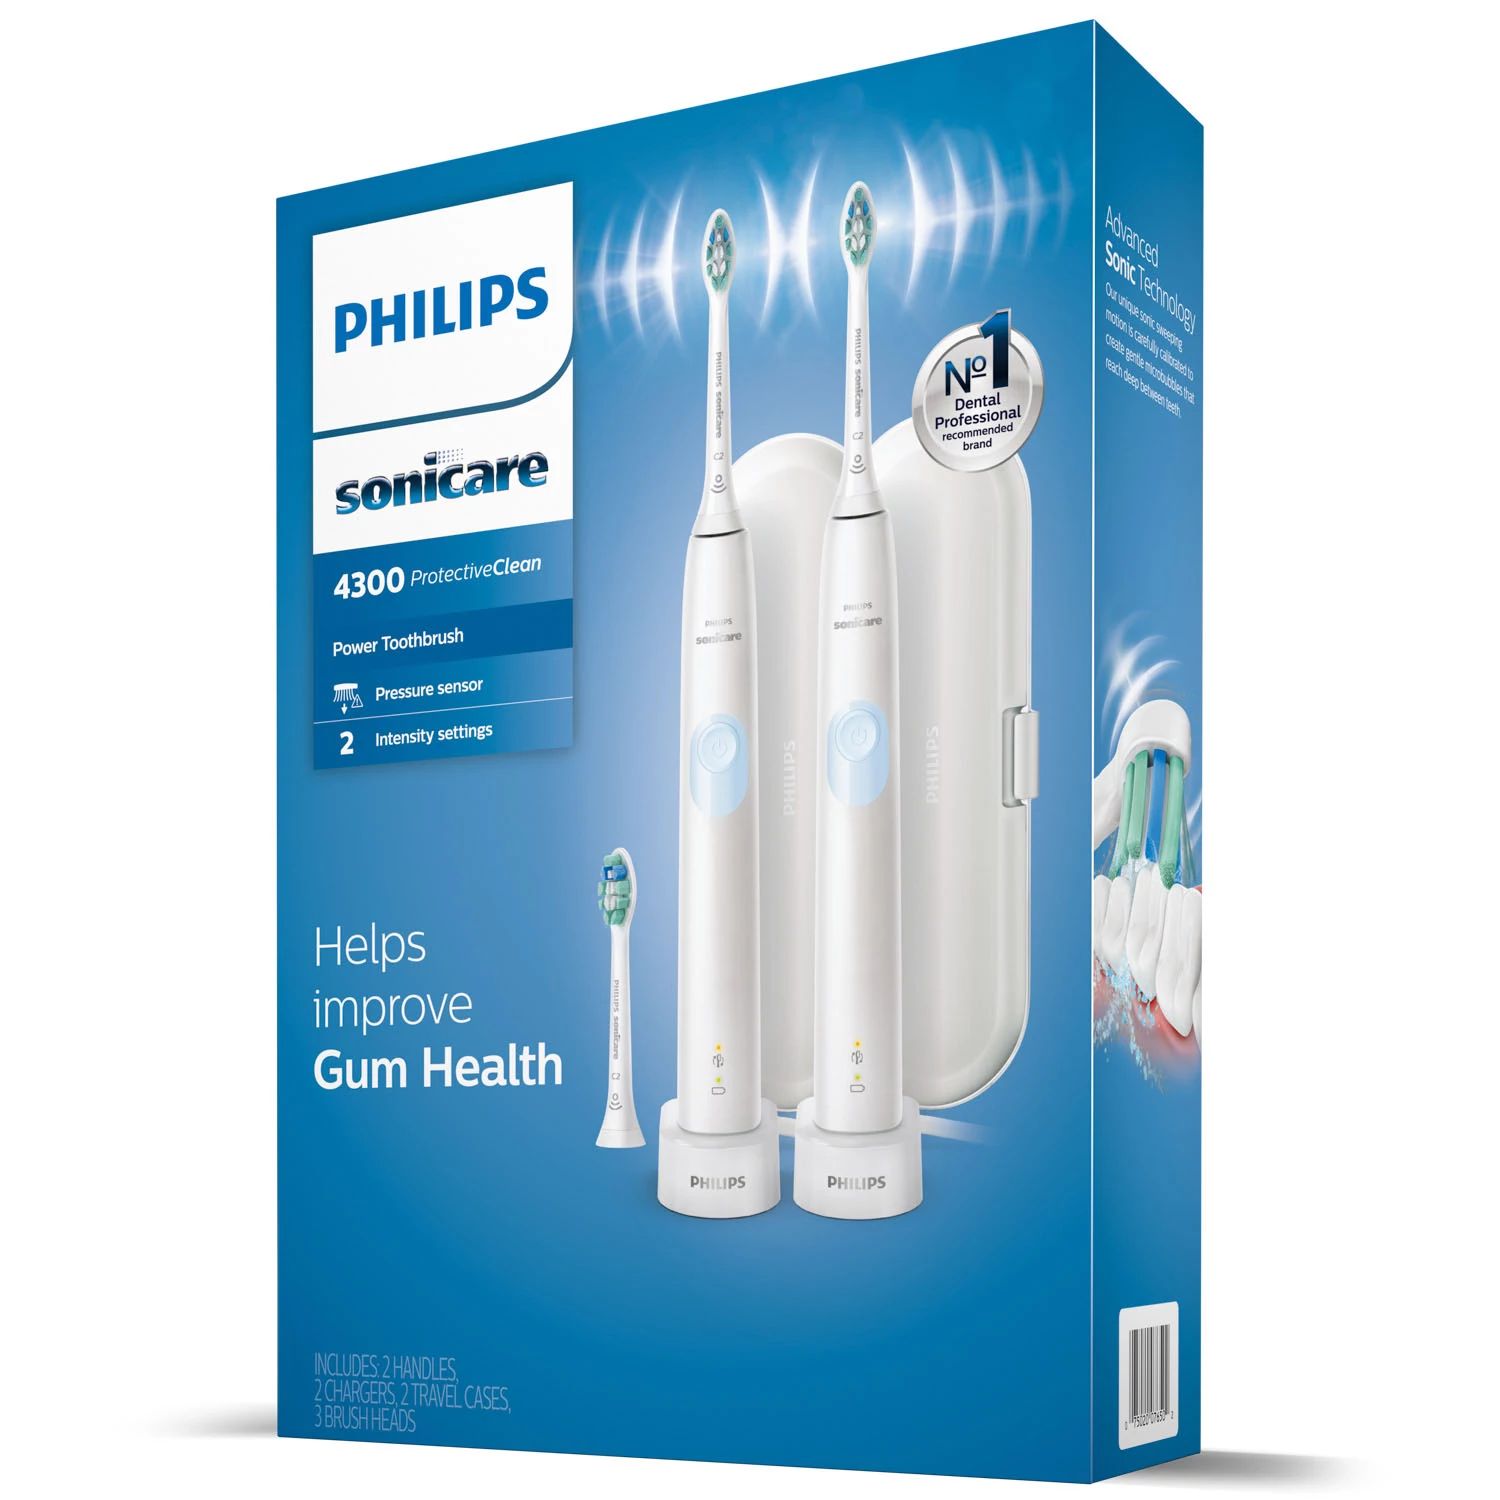 Philips Sonicare ProtectiveClean 4300 Rechargeable Toothbrush, 2 pk. (Choose Your Color) | Sam's Club